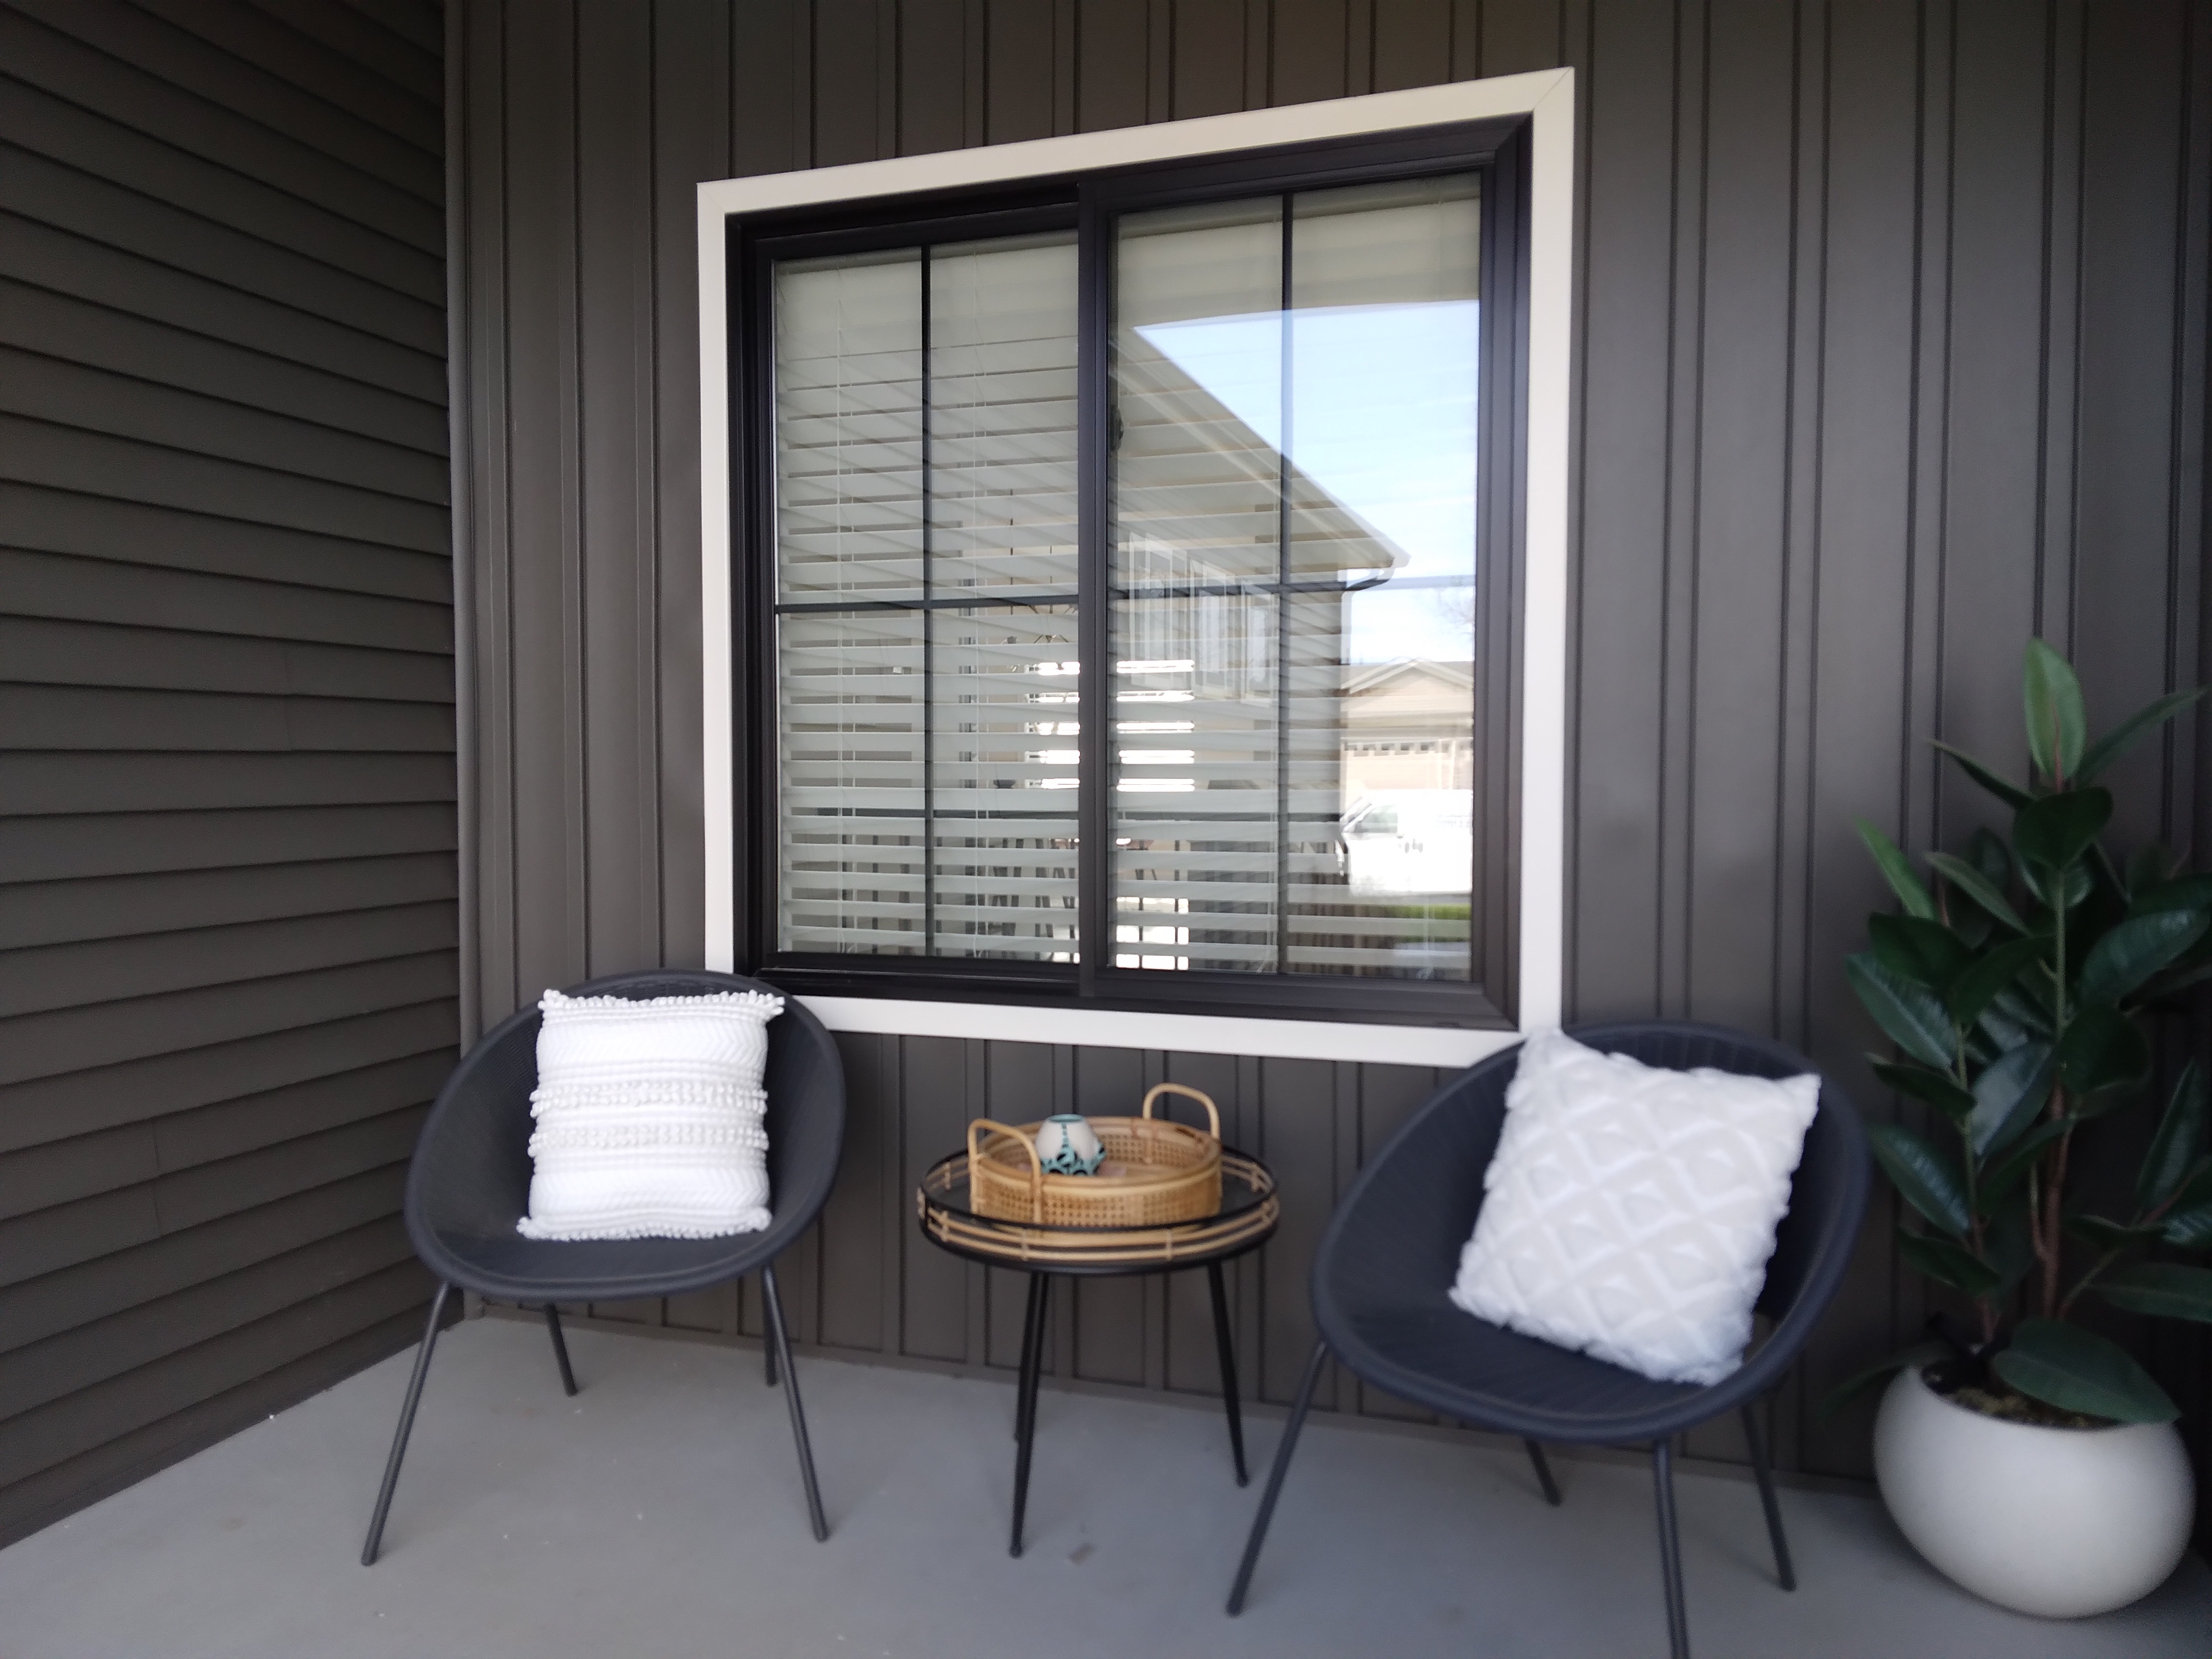 It's important to consider what your window blinds or shades will look like from the outside. These white faux wood blinds look great from both the inside of the house and the outside.  BudgetBlinds  WindowCoverings  Blinds  SpringfieldIllinois